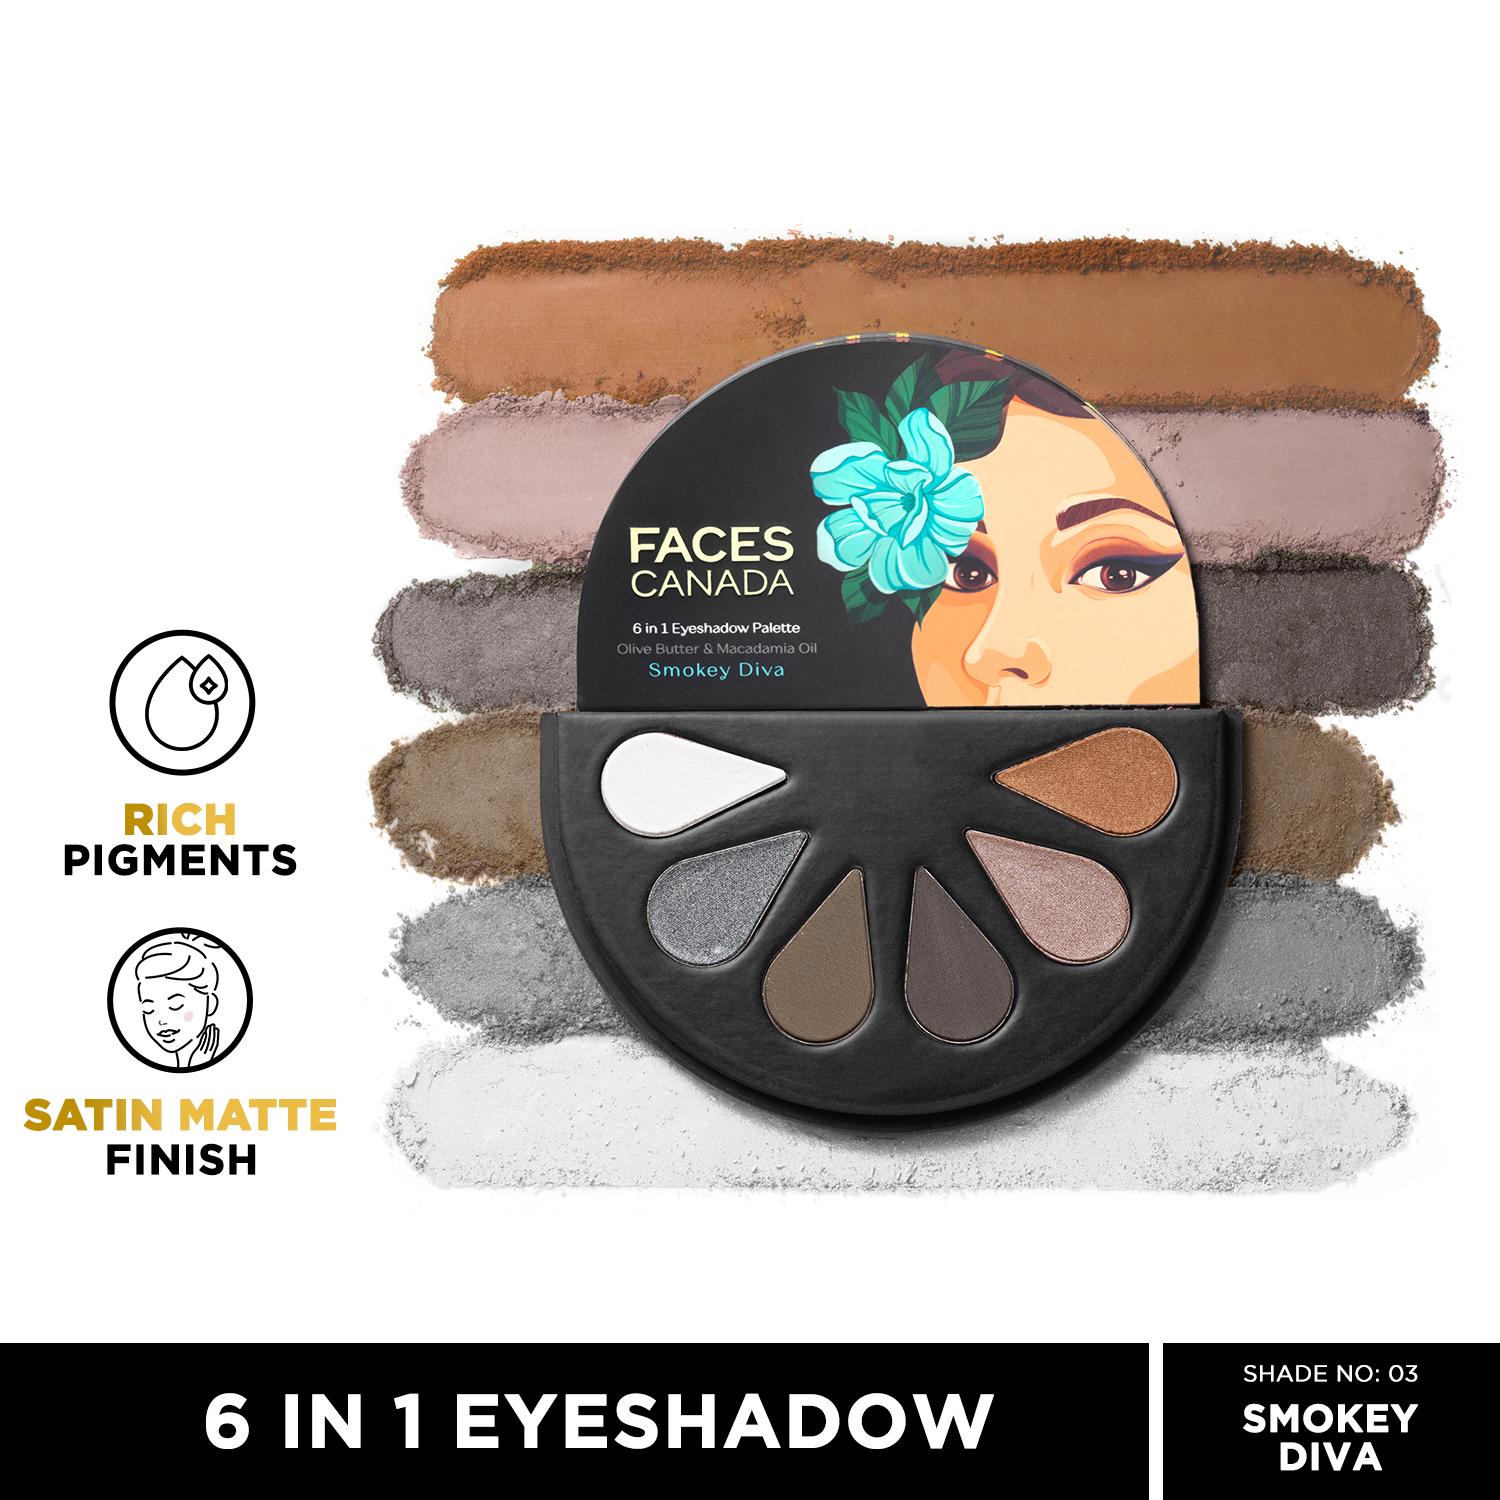 Faces Canada | Faces Canada 6-In-1 Eyeshadow Palette - 03 Smokey Diva (6g)